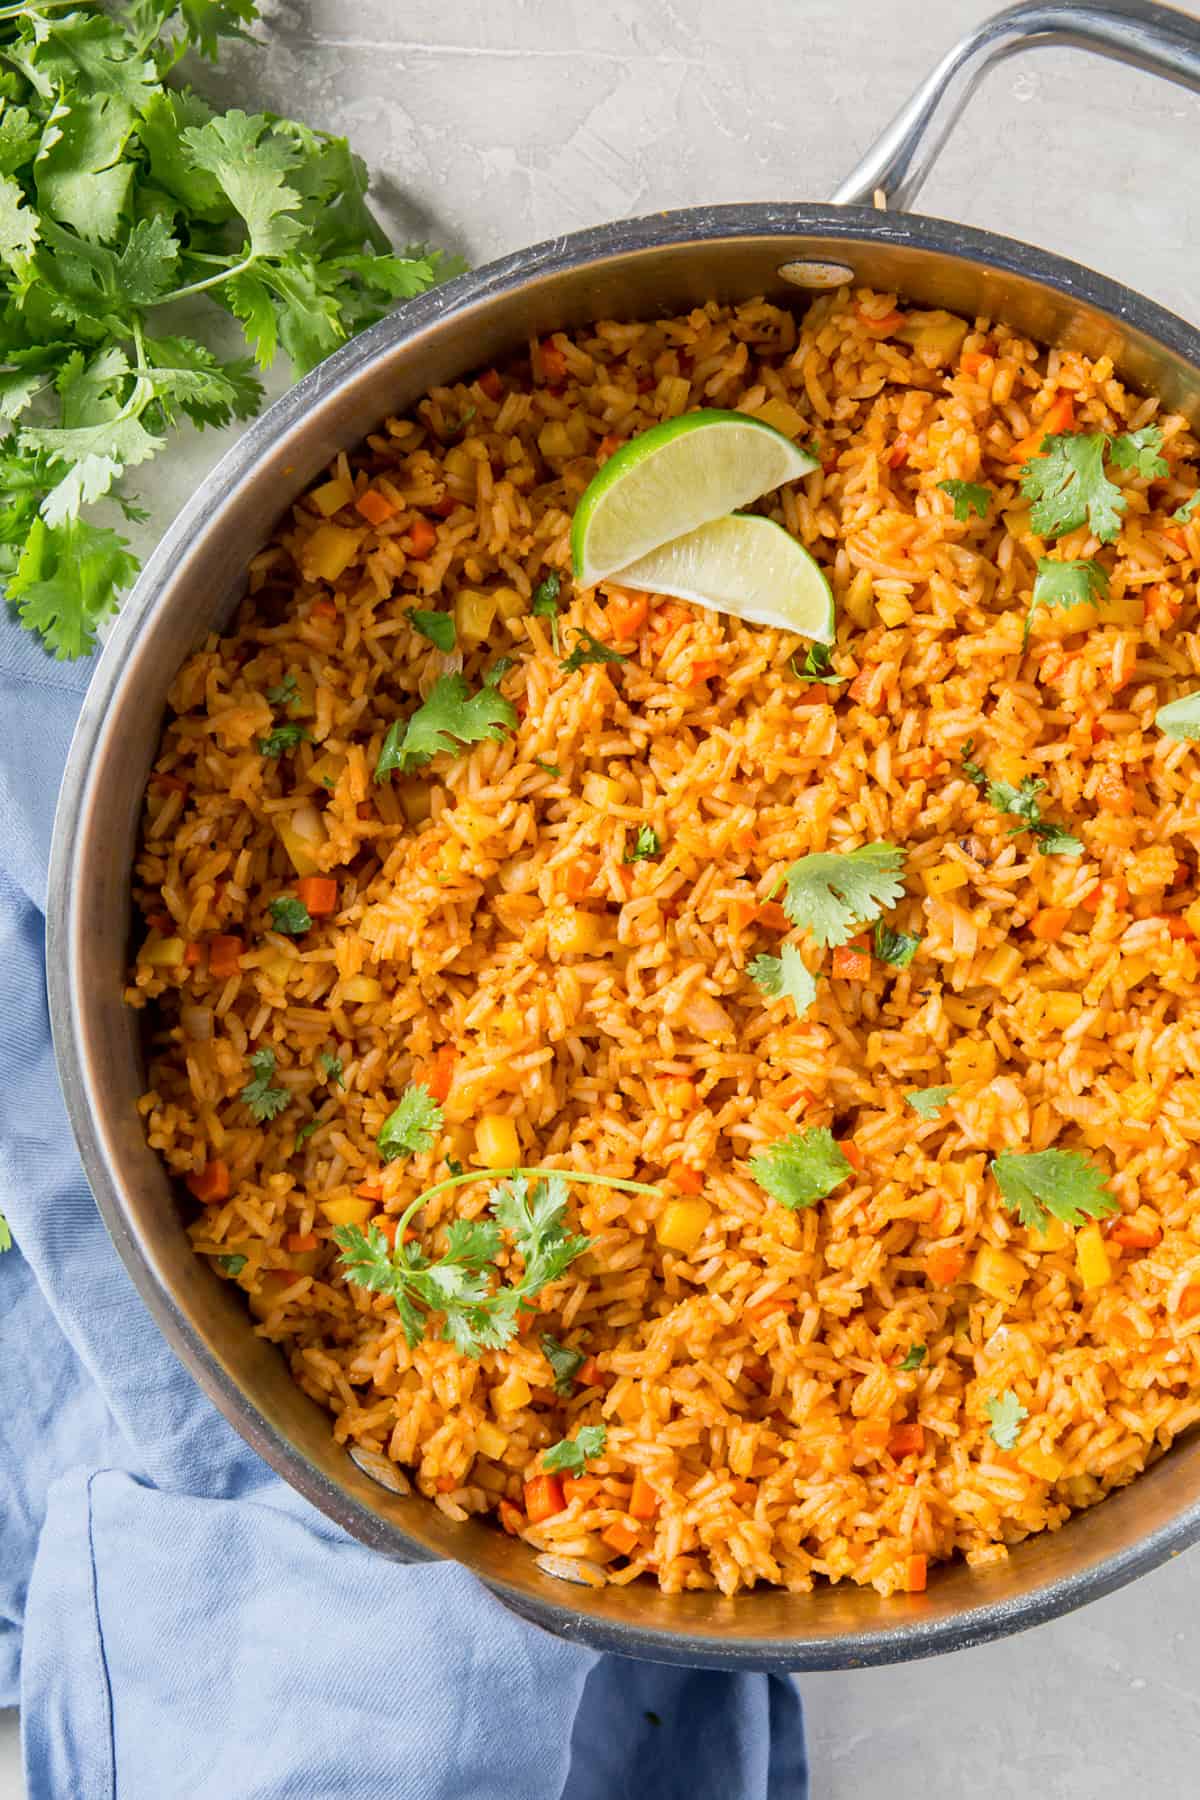 A skillet filled with Mexican rice, cilantro and slices of lime.